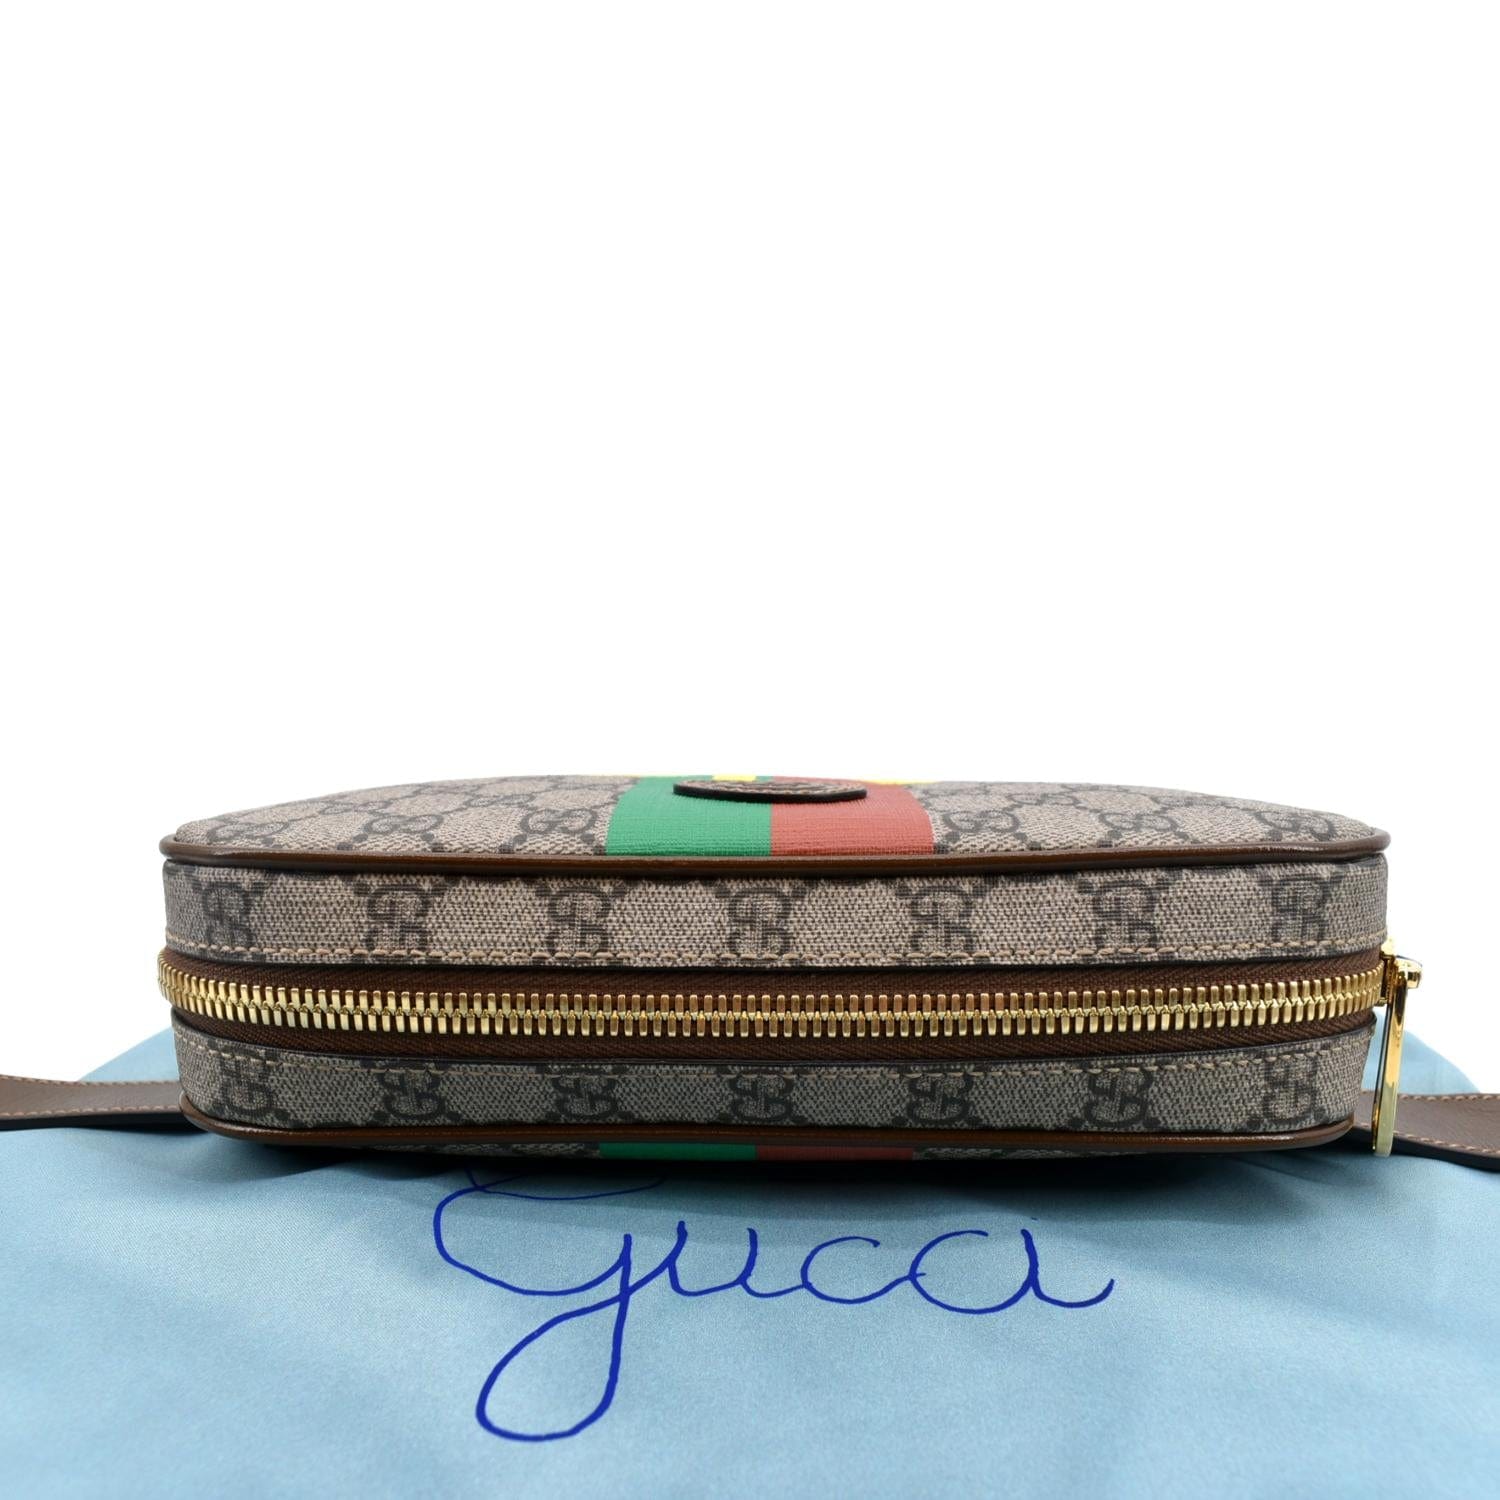 My Gucci Ophidia Bag Is Fake  How did I find out. 